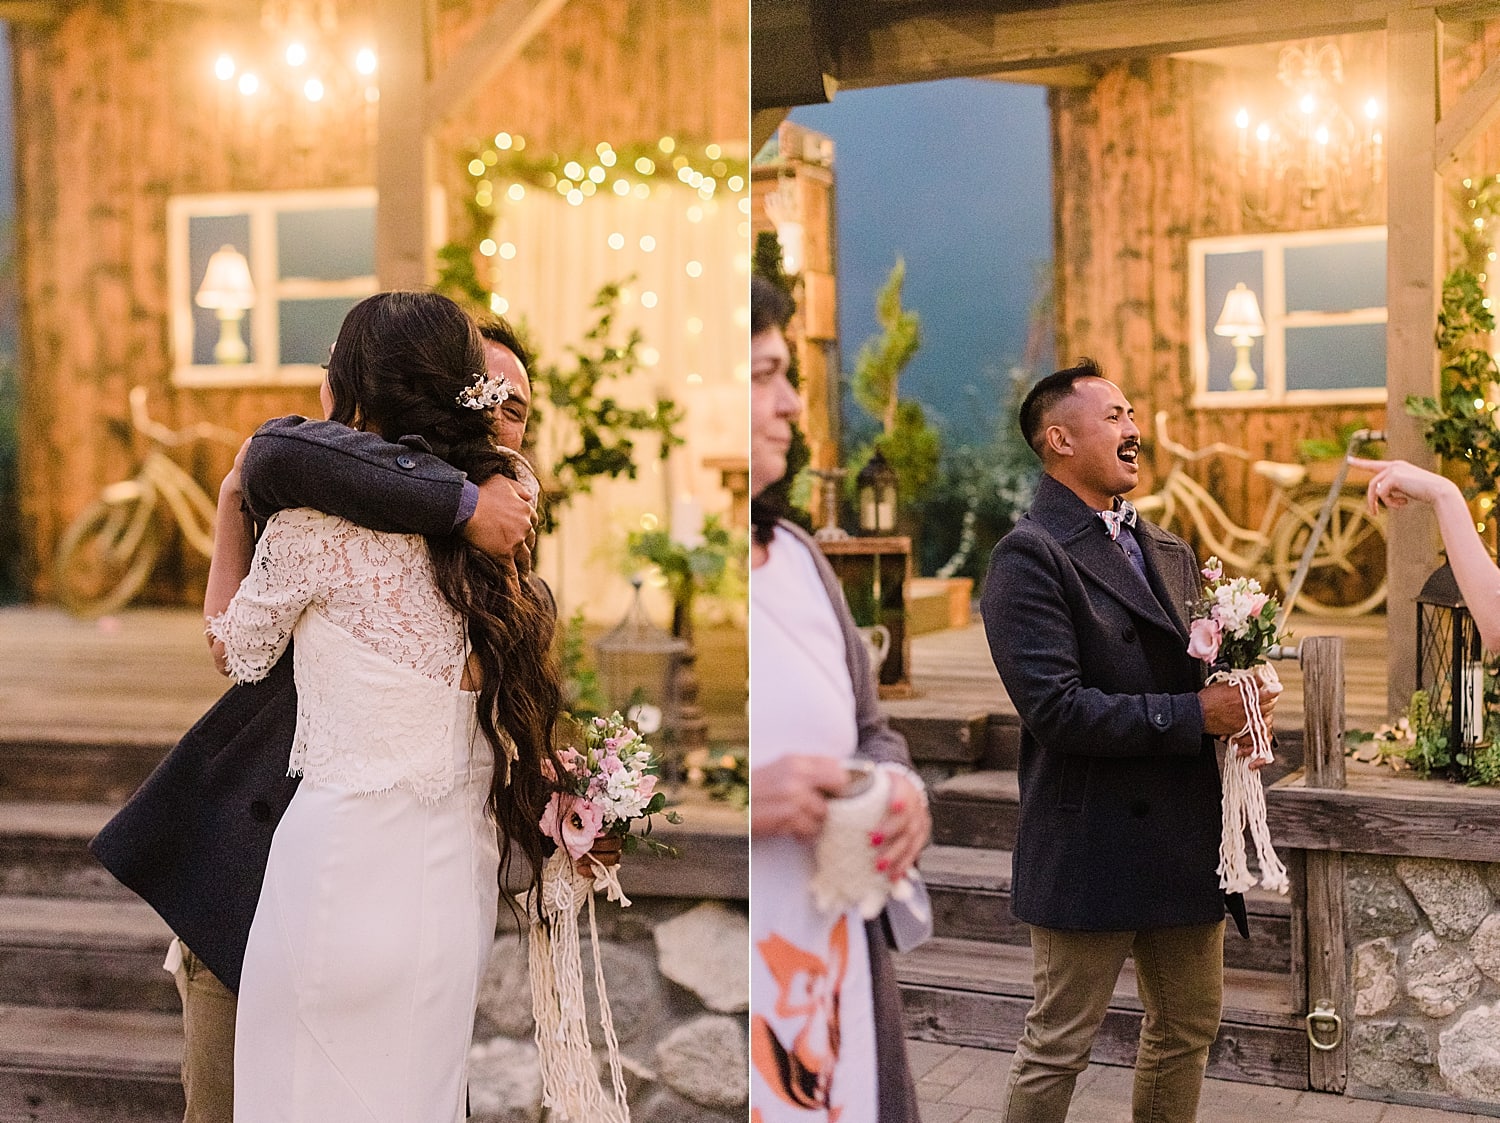 catching the bouquet